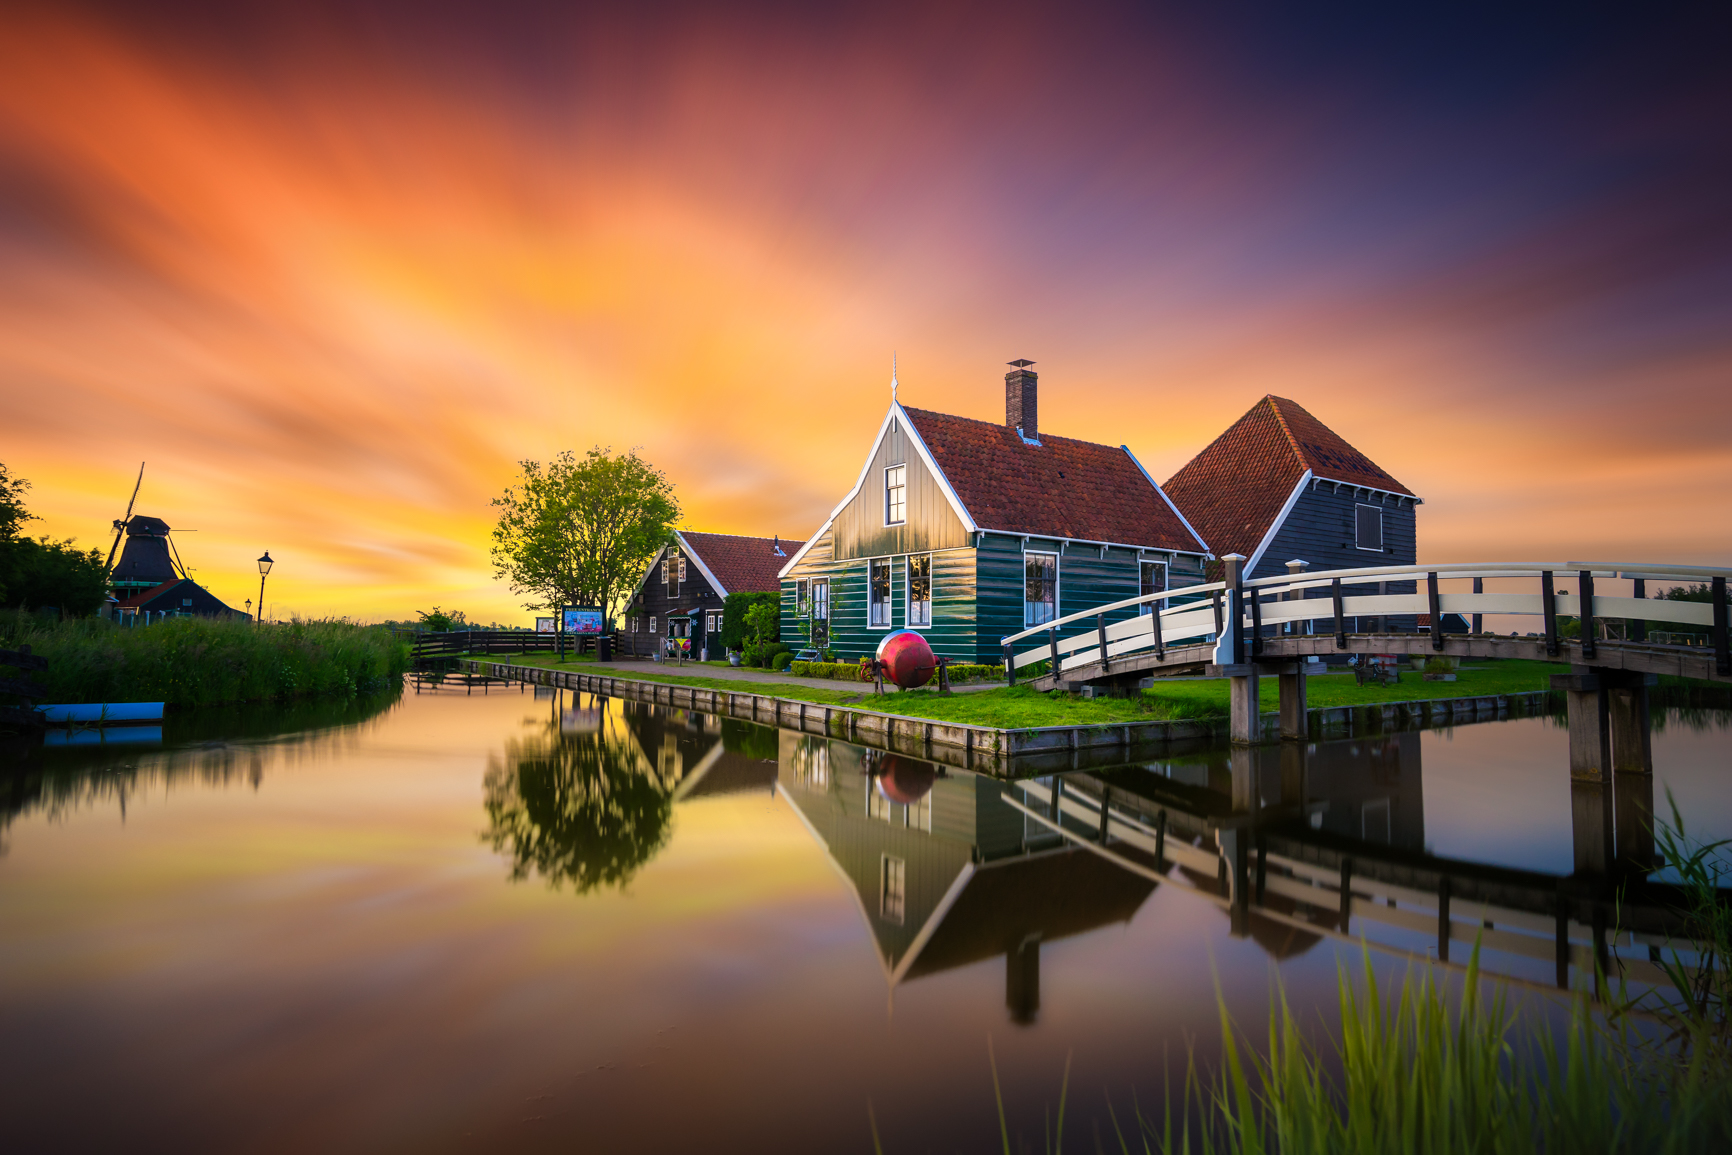 Holland is beautiful